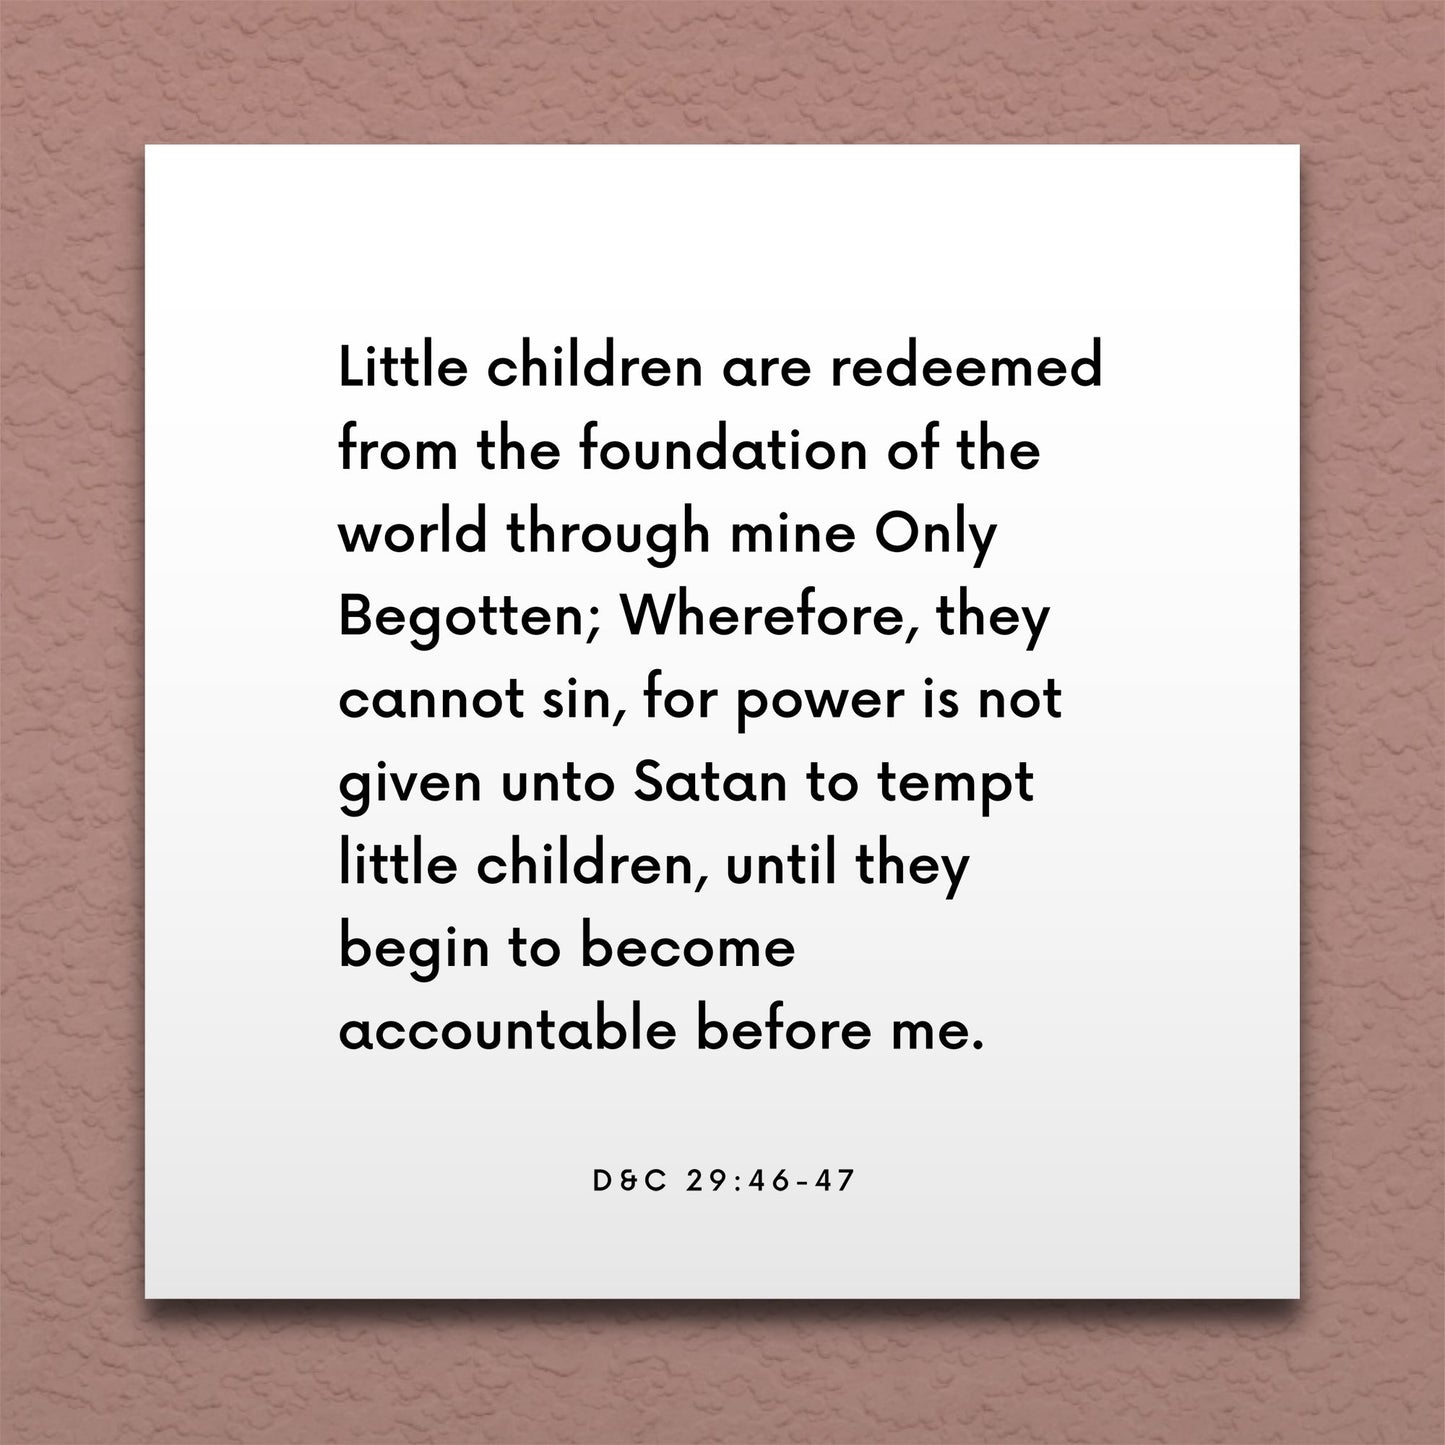 Wall-mounted scripture tile for D&C 29:46-47 - "Little children are redeemed through mine Only Begotten"